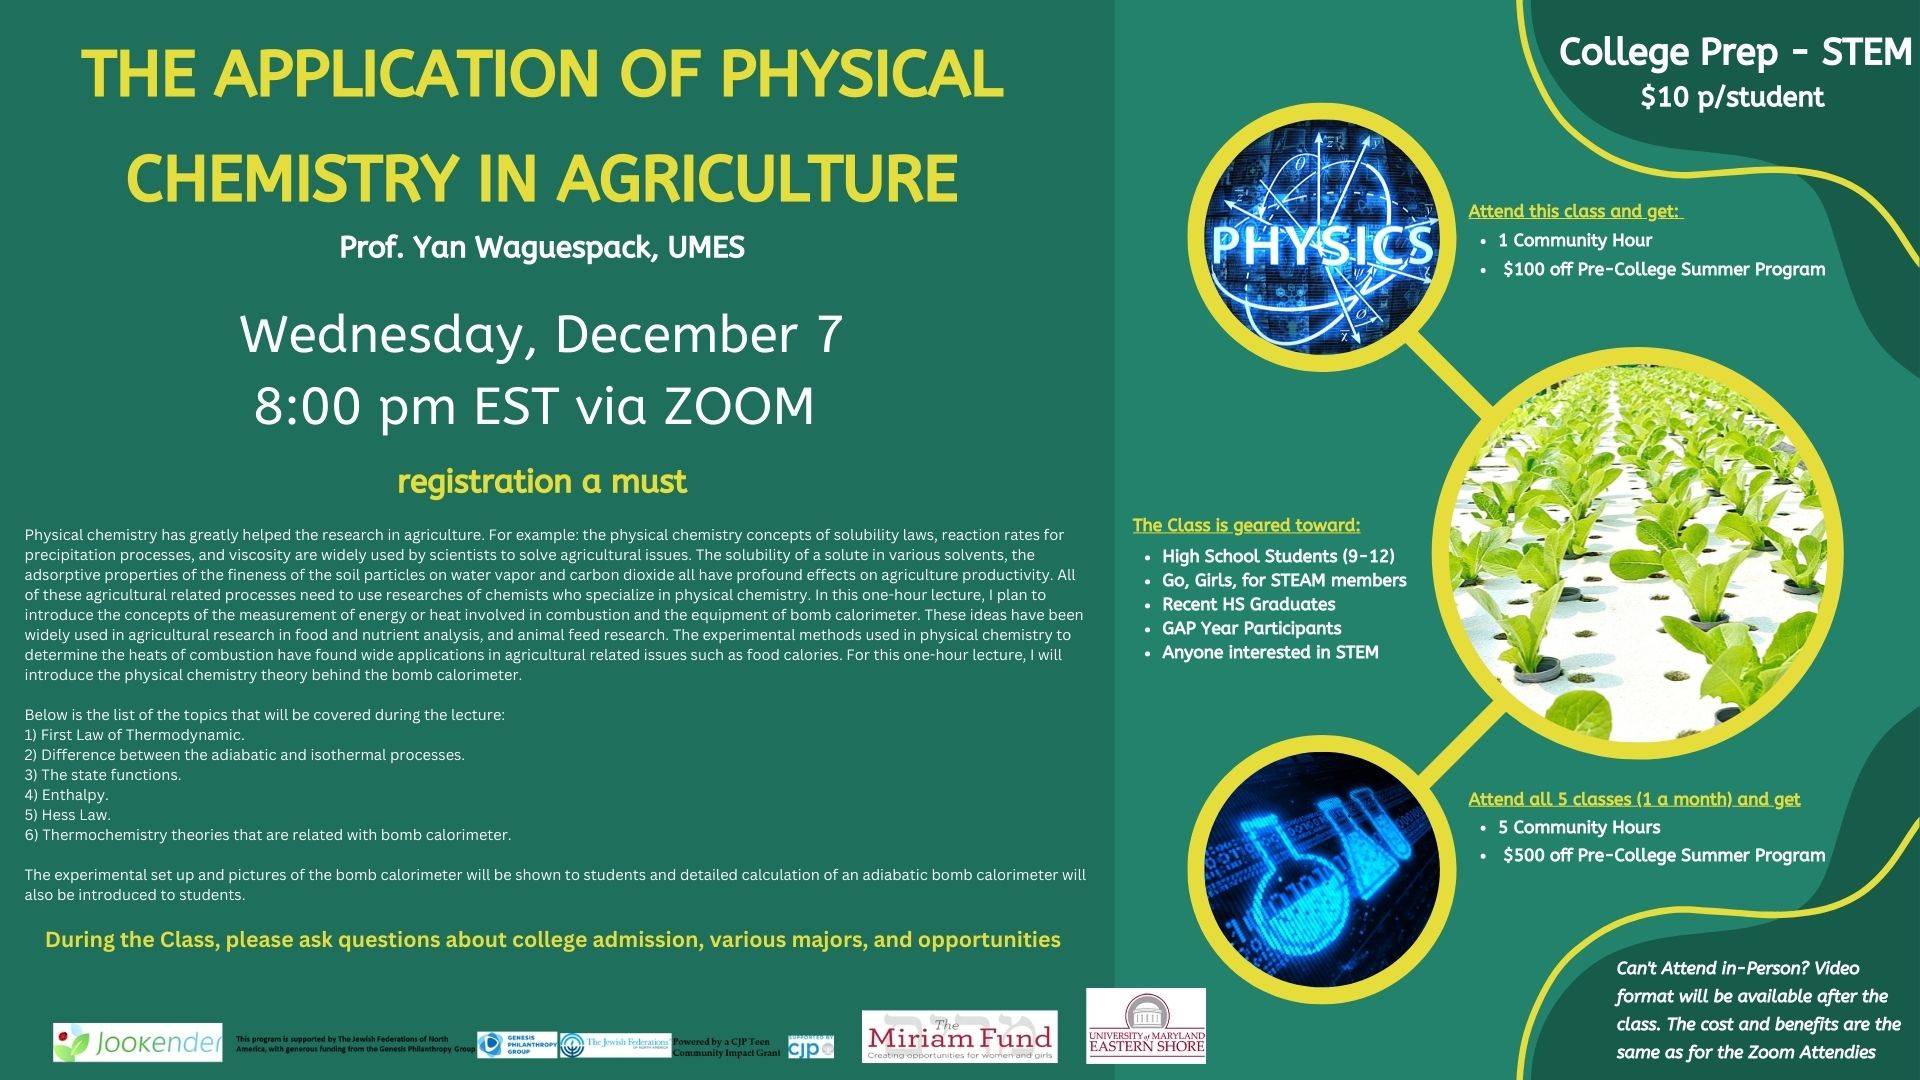 The Application of Physical Chemistry in Agriculture